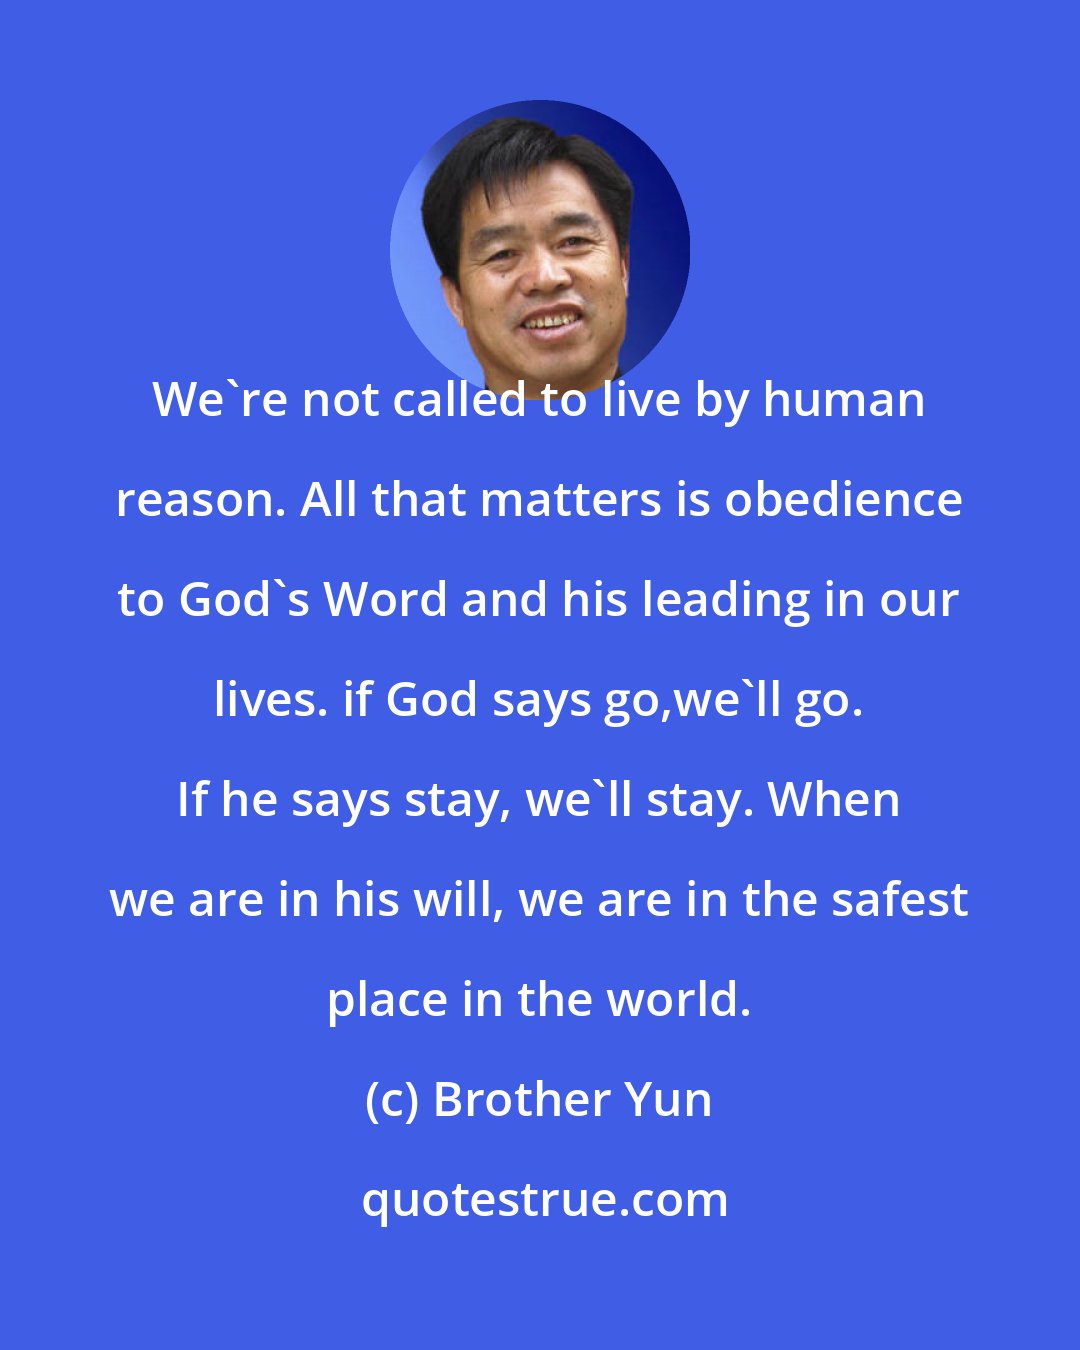 Brother Yun: We're not called to live by human reason. All that matters is obedience to God's Word and his leading in our lives. if God says go,we'll go. If he says stay, we'll stay. When we are in his will, we are in the safest place in the world.